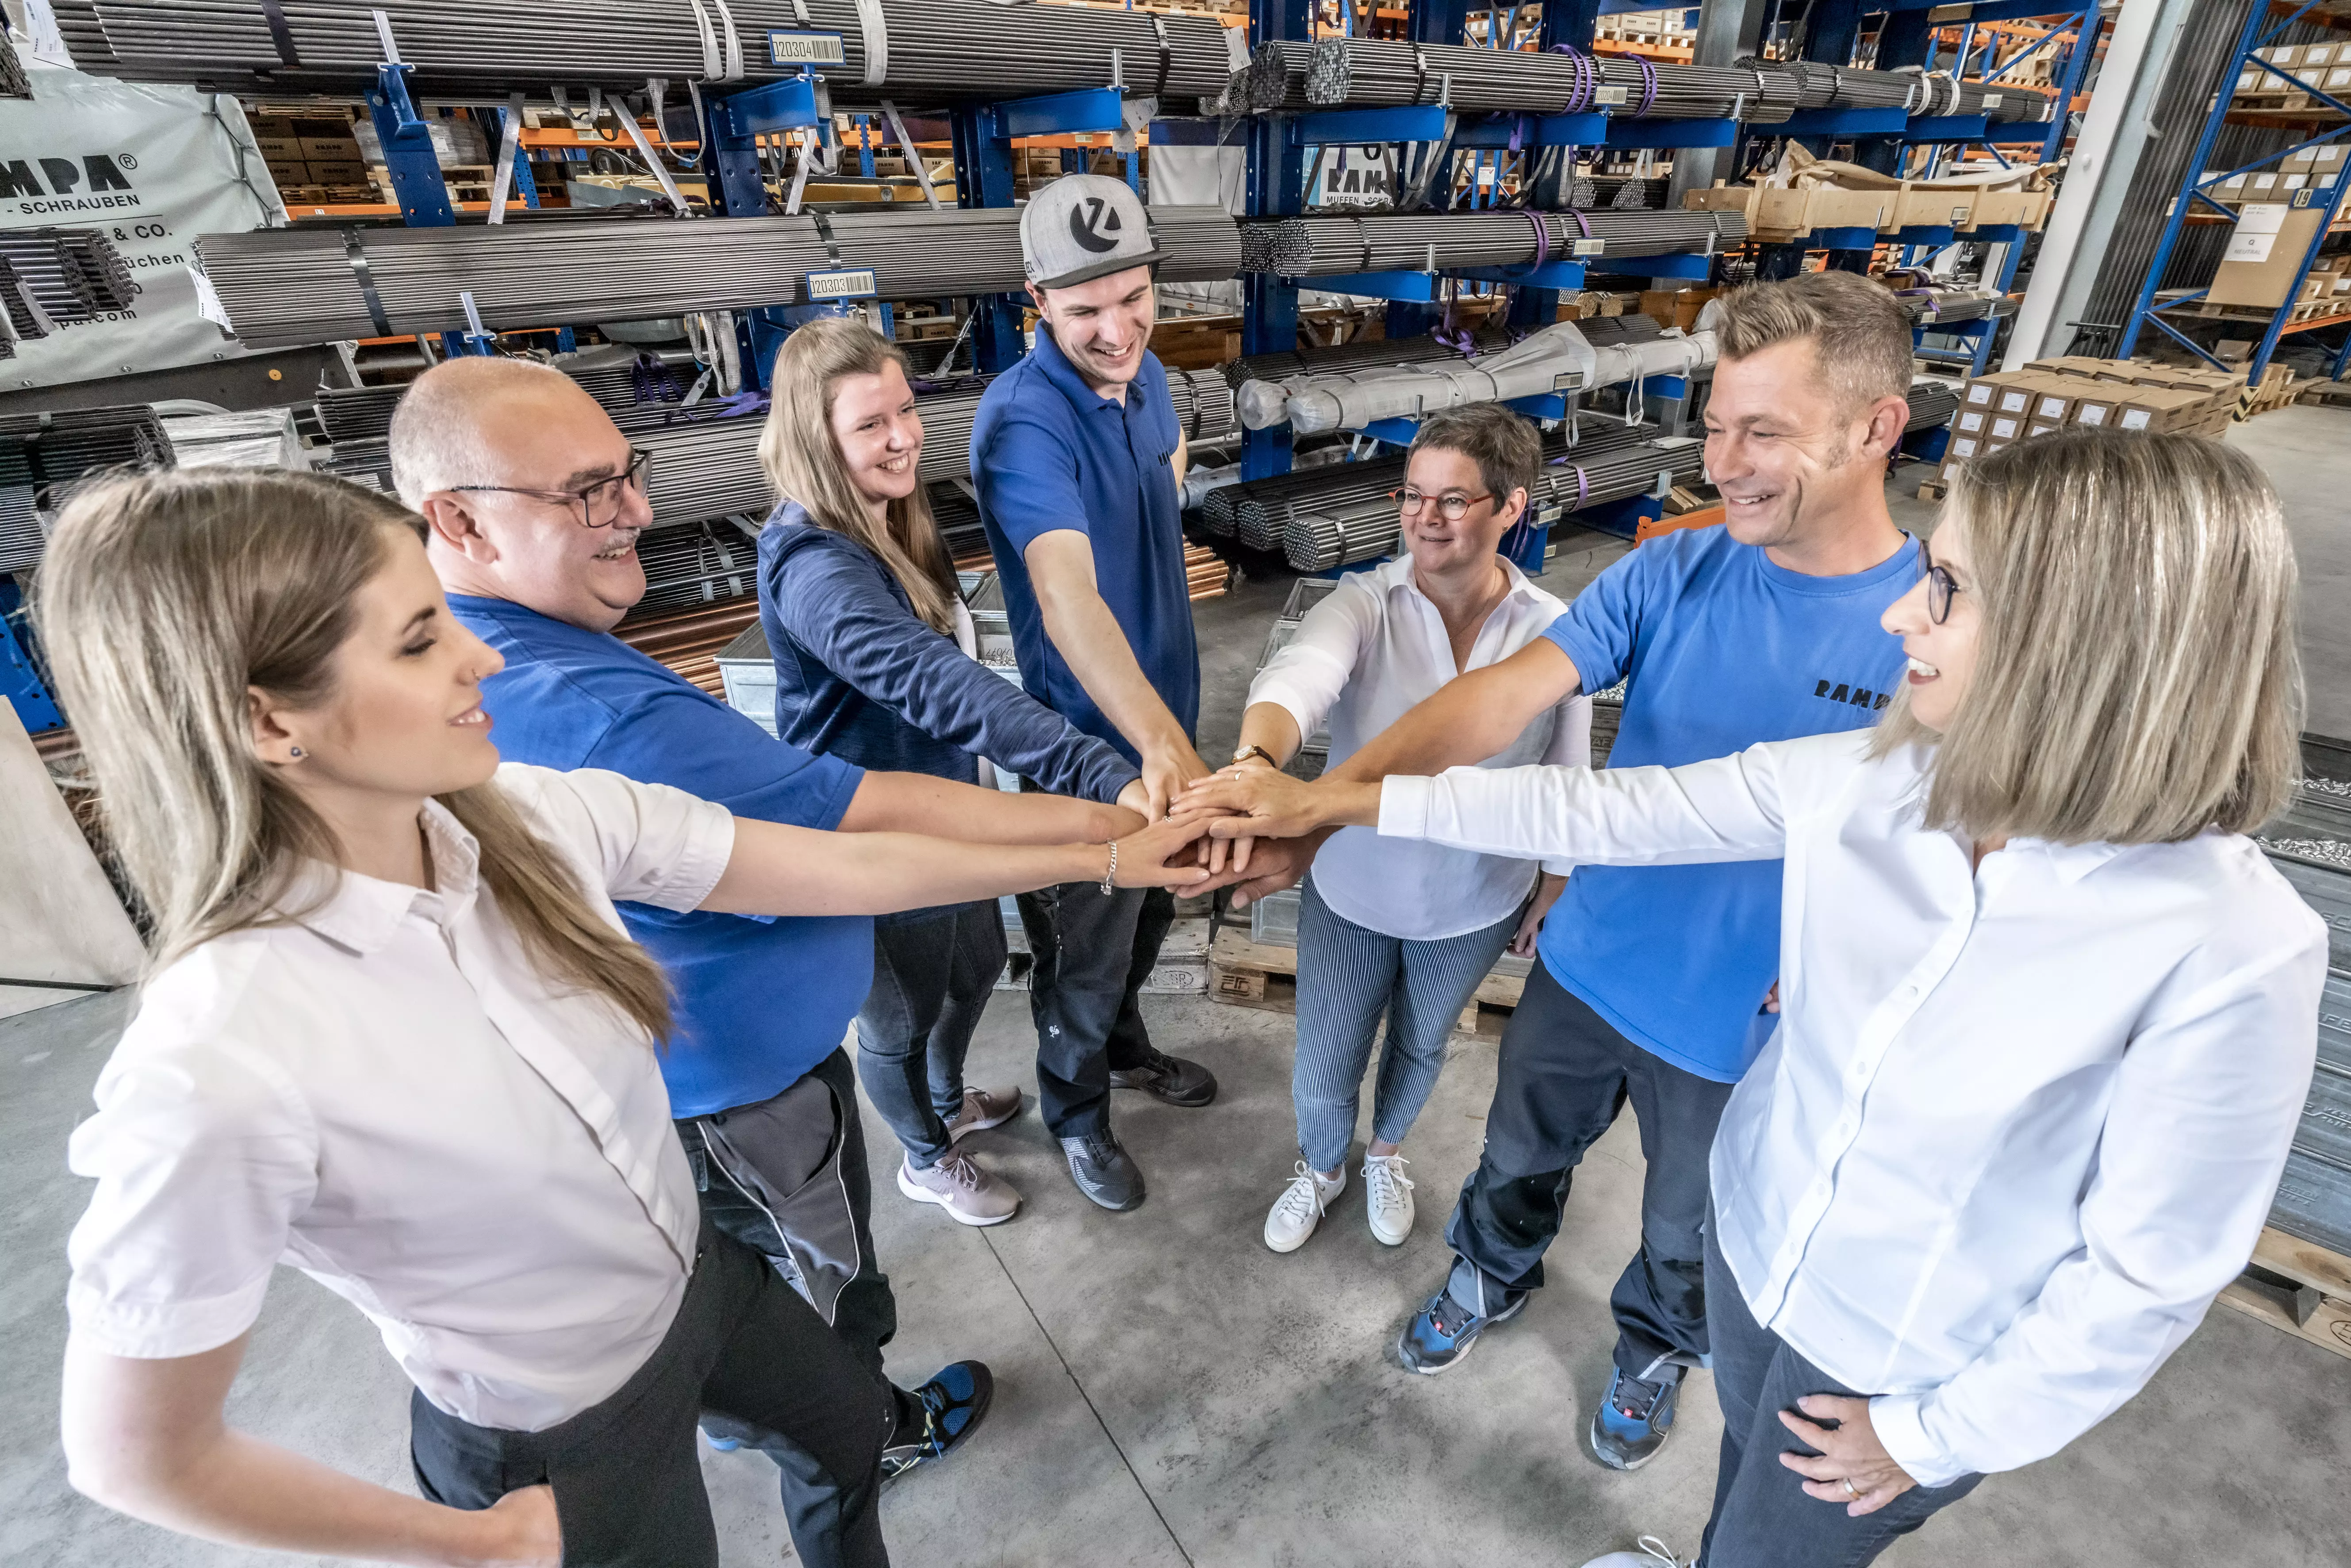 RAMPA's employees focus on team spirit in their everyday work. This message is to be transported by bringing the hands of different people together in the center.